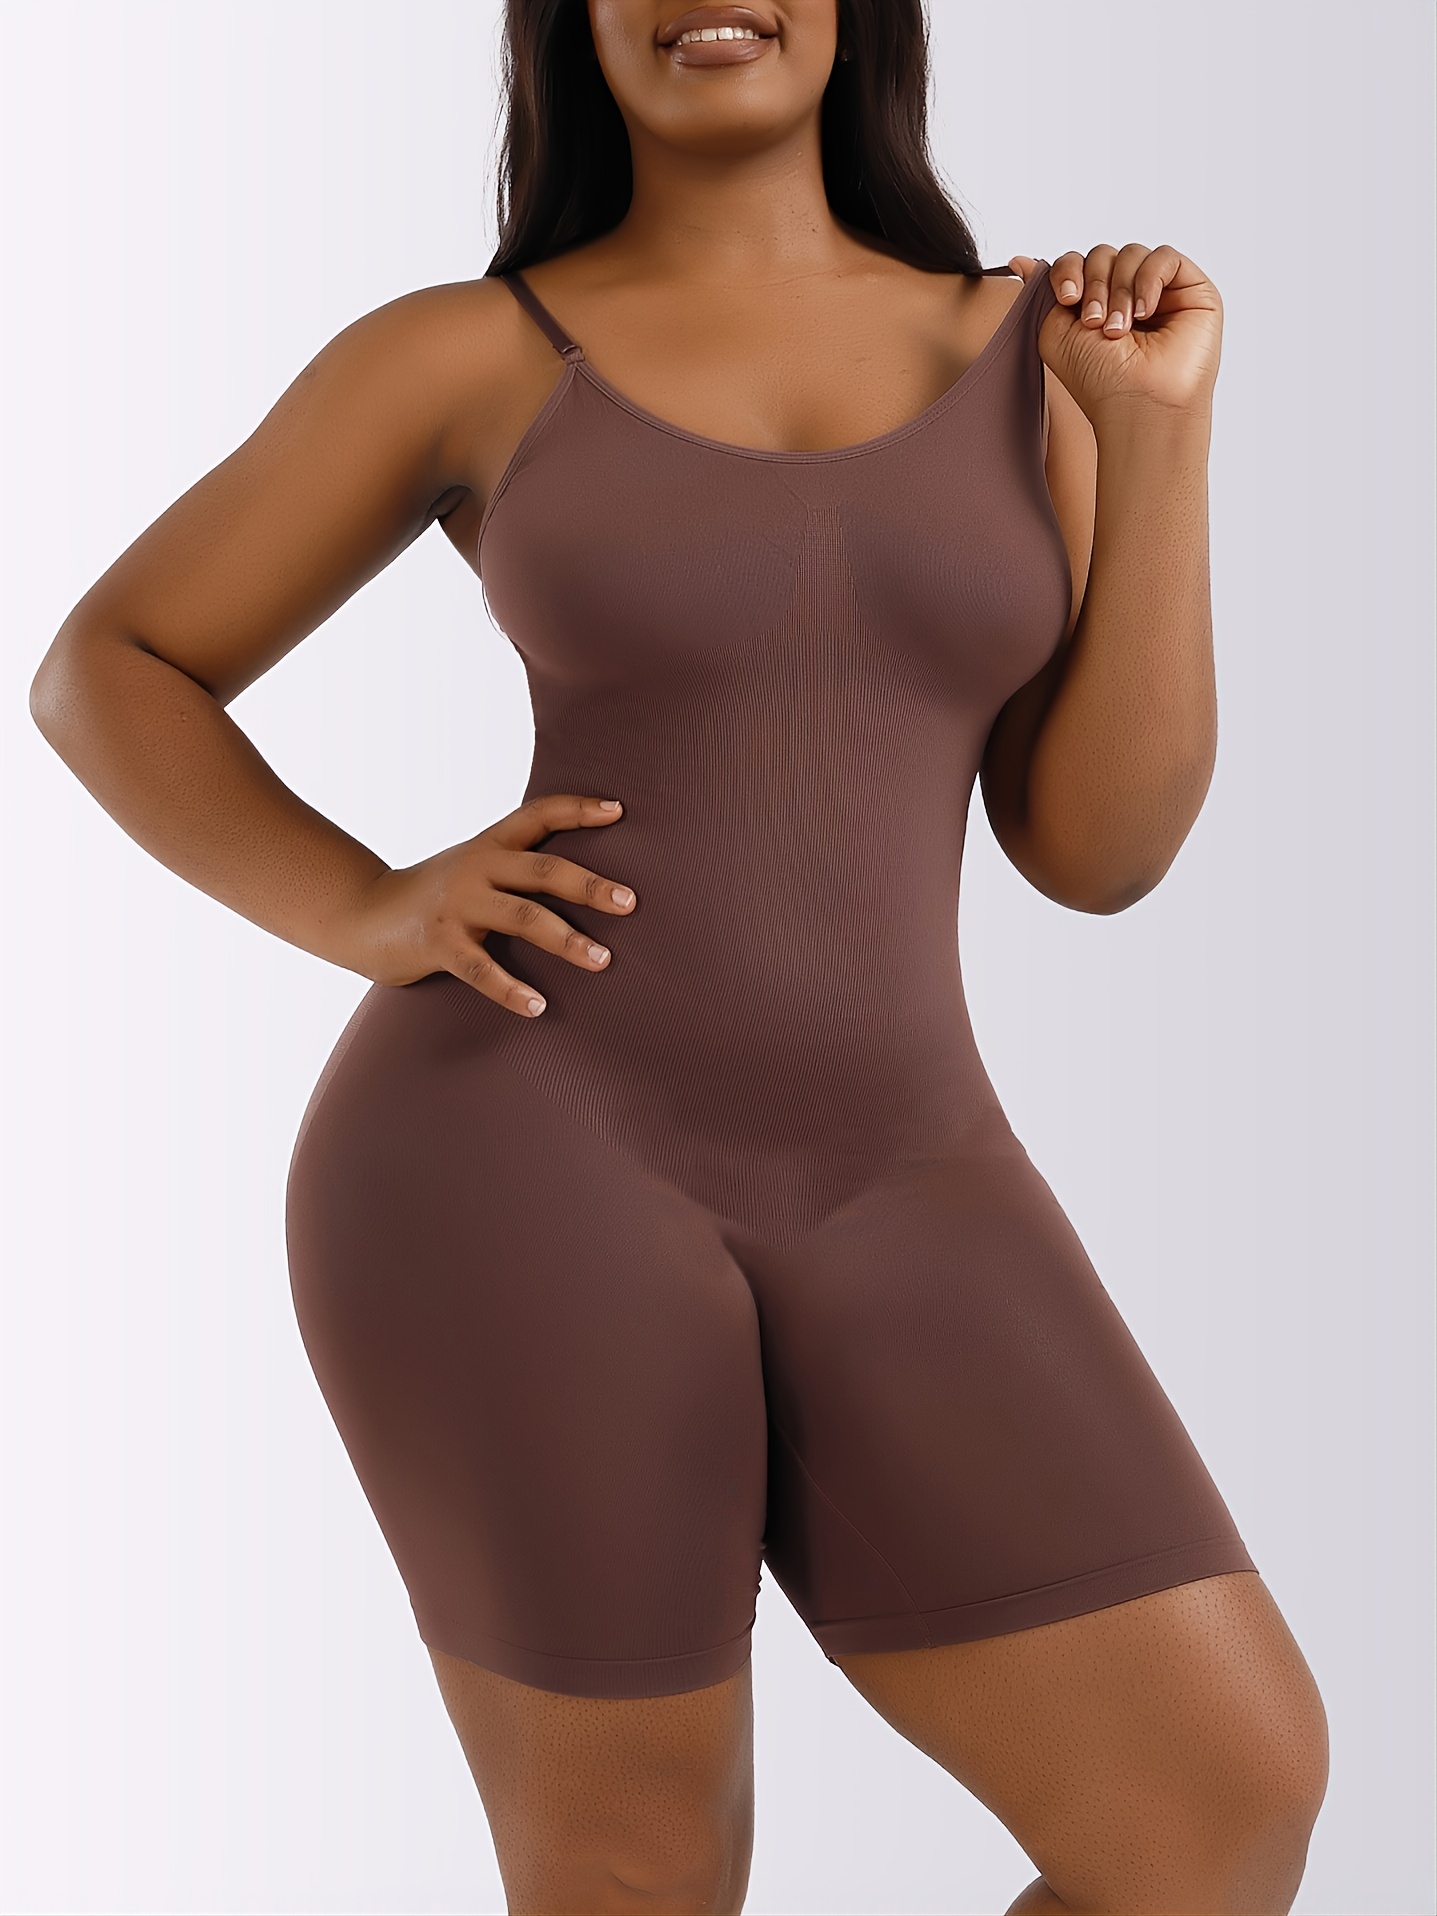 Find Cheap, Fashionable and Slimming seamless bodysuit 